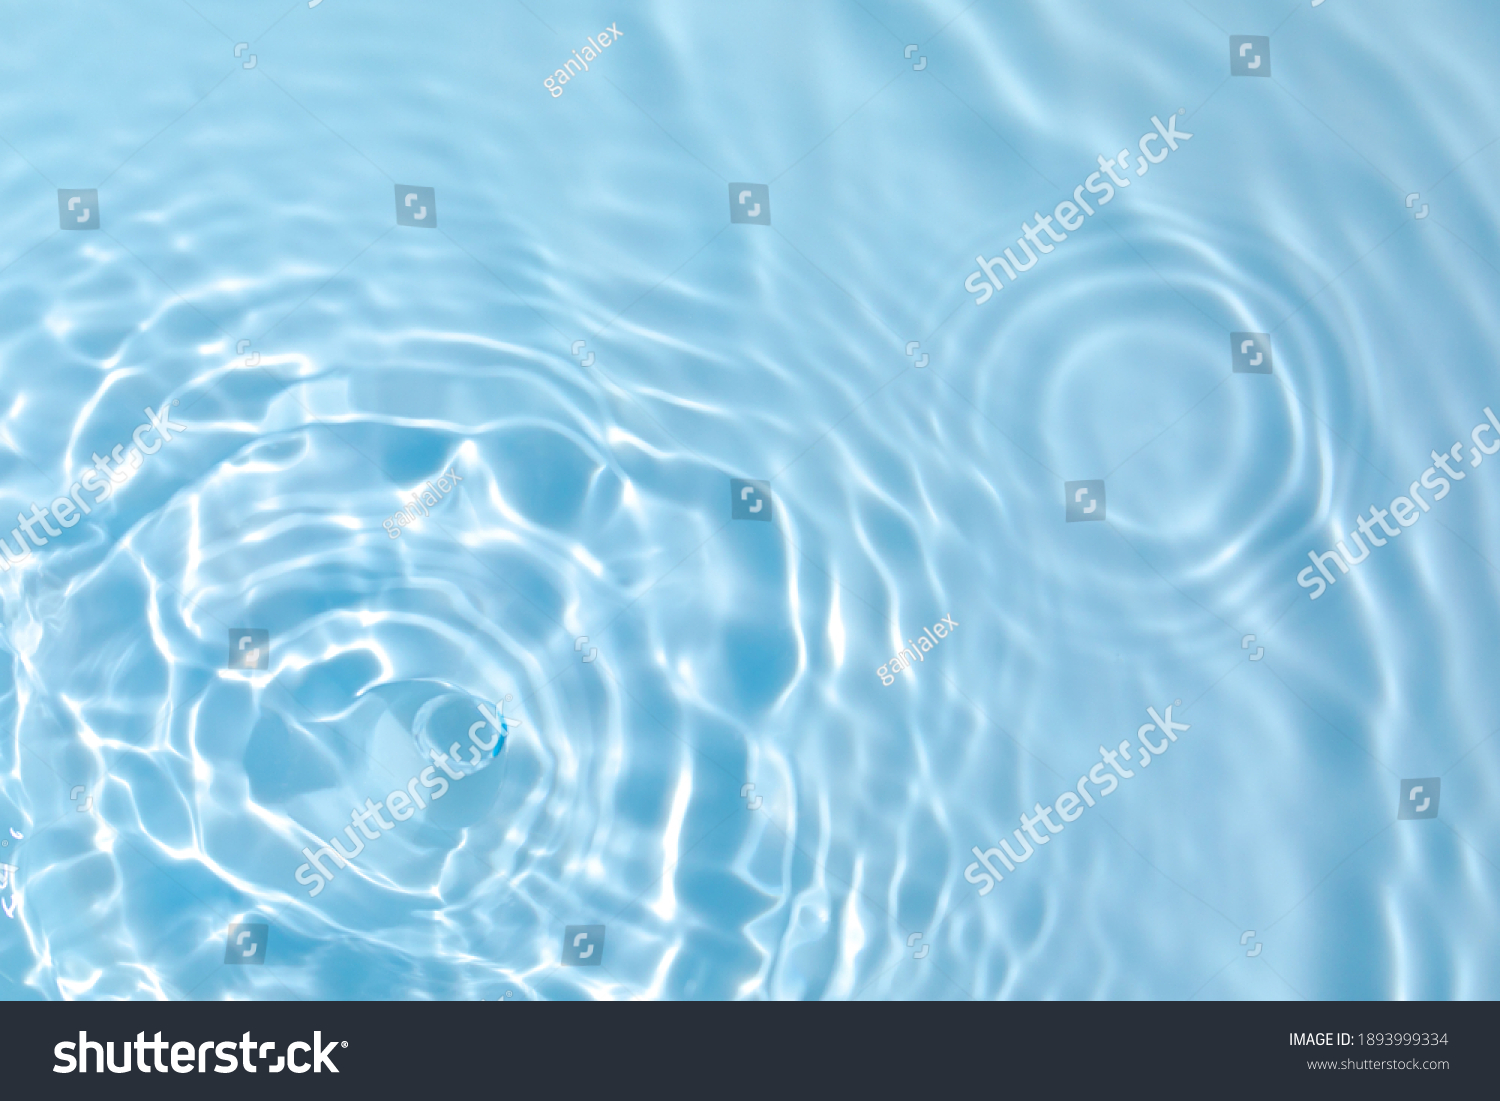 De-focused blurred transparent blue colored clear calm water surface texture with splashes and bubbles. Trendy abstract nature background. Water waves in sunlight with copy space. #1893999334